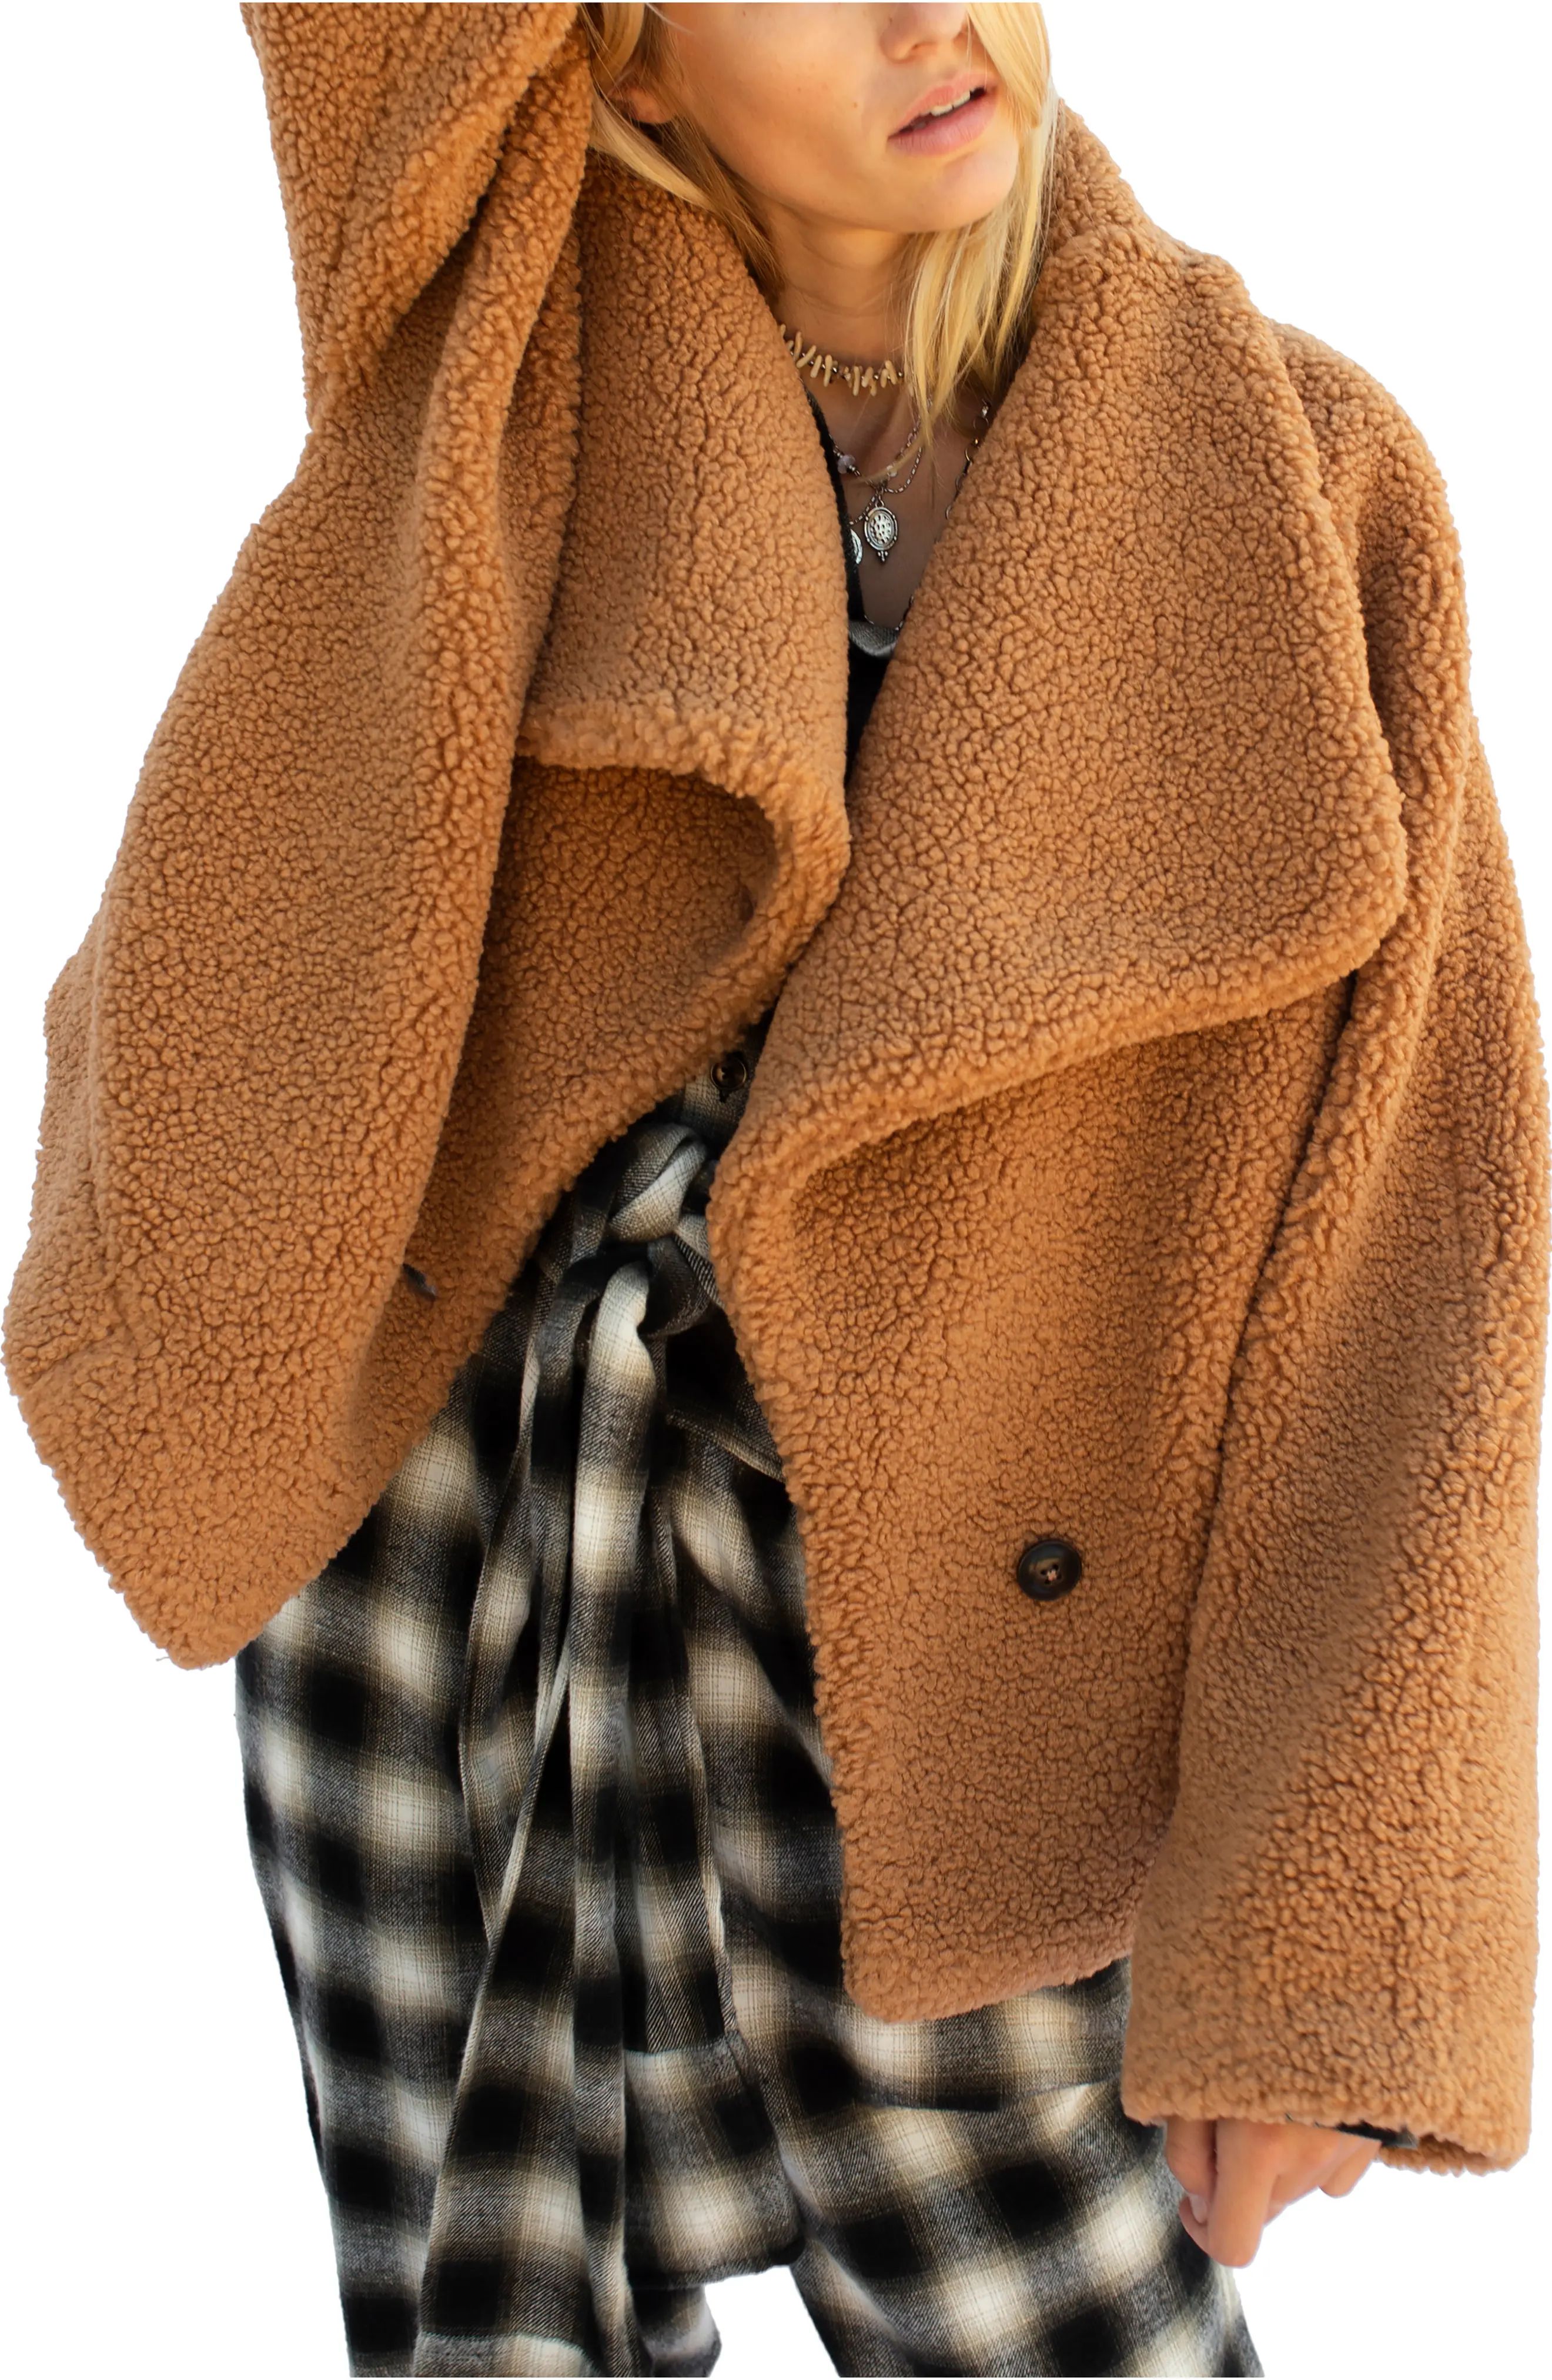 Women's Free People Izzy Wrap Teddy Coat, Size X-Small - Brown | Nordstrom